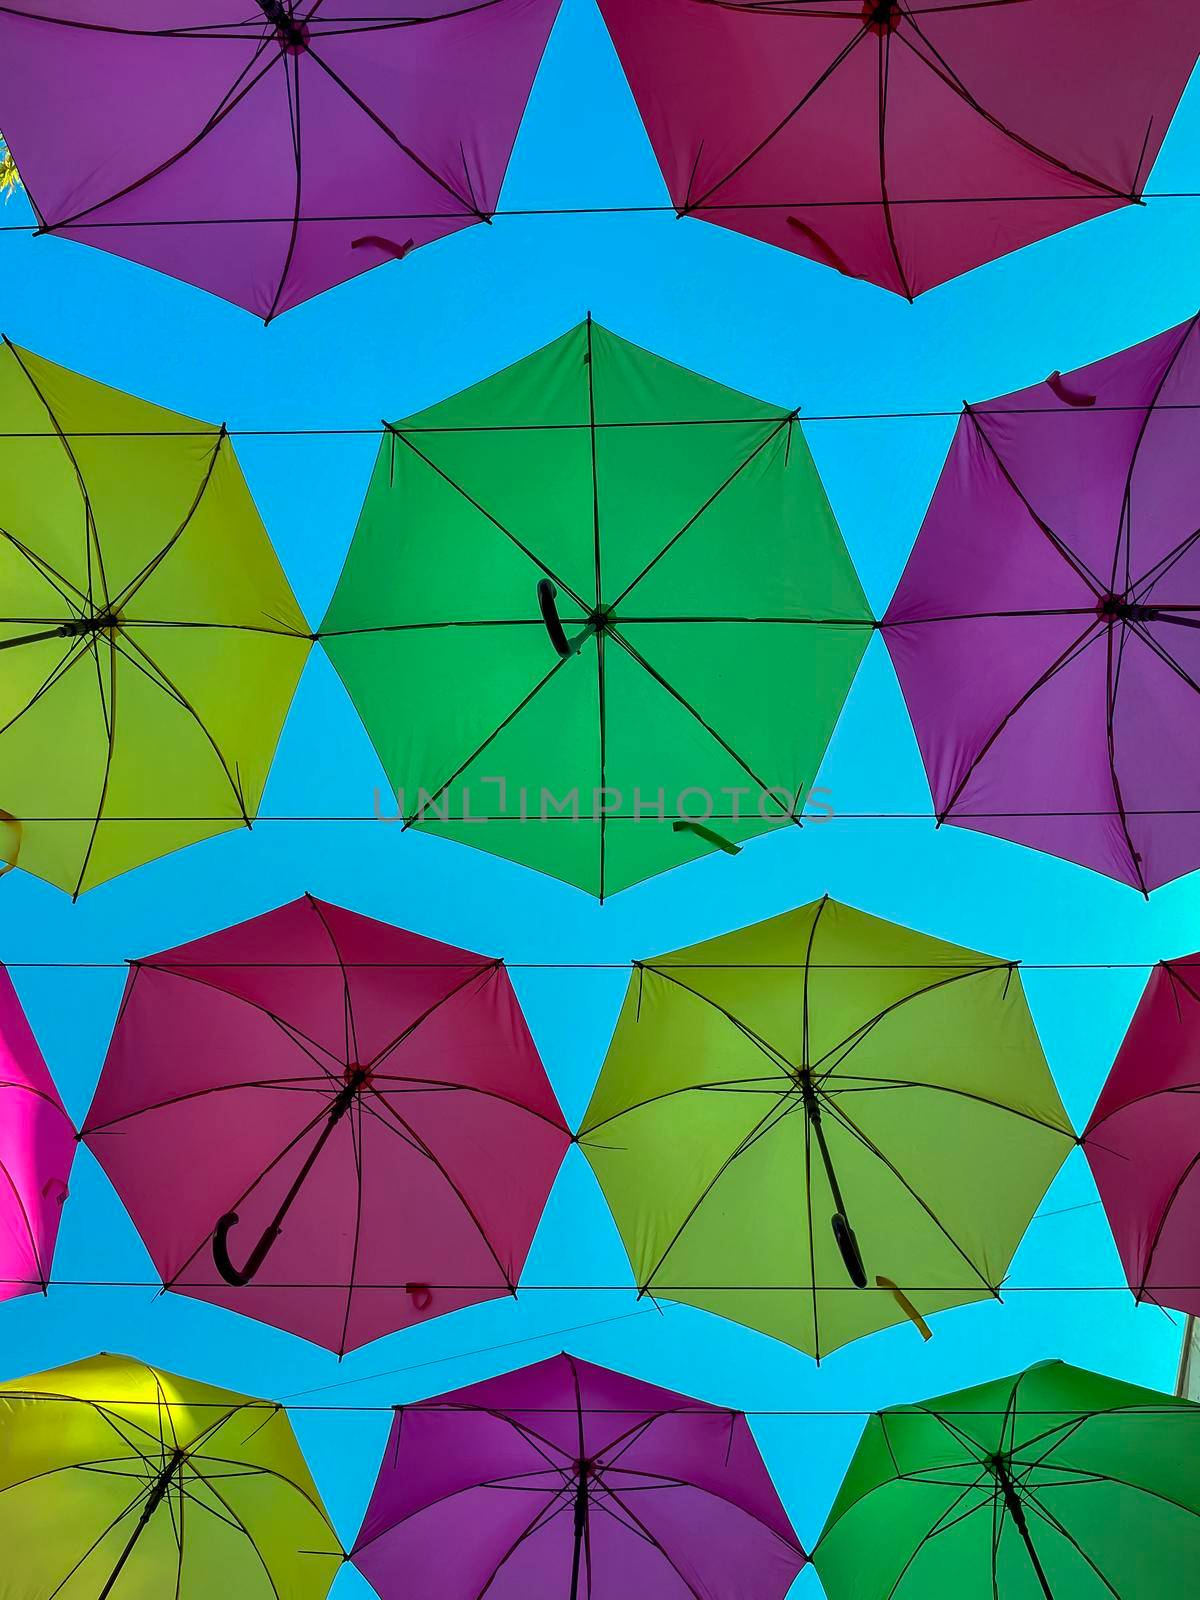 Low Angle View Of Colorful Umbrellas Hanging Outdoors - stock photo by kaliaevaen